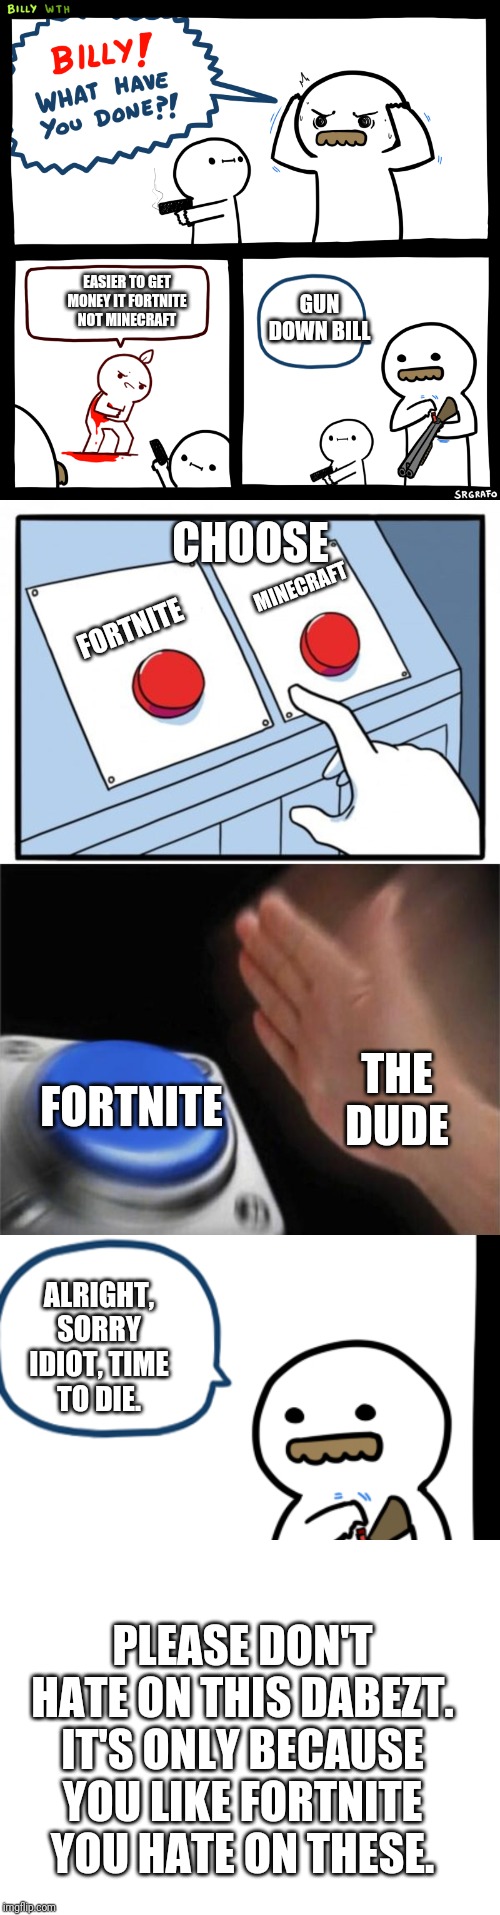 Fortnite Choose It Random Idiot(Please don't hate me Dabezt) | EASIER TO GET MONEY IT FORTNITE NOT MINECRAFT; GUN DOWN BILL; CHOOSE; MINECRAFT; FORTNITE; THE DUDE; FORTNITE; ALRIGHT, SORRY IDIOT, TIME TO DIE. PLEASE DON'T HATE ON THIS DABEZT. IT'S ONLY BECAUSE YOU LIKE FORTNITE YOU HATE ON THESE. | image tagged in blank white template,two buttons,blank nut button,billy what have you done | made w/ Imgflip meme maker